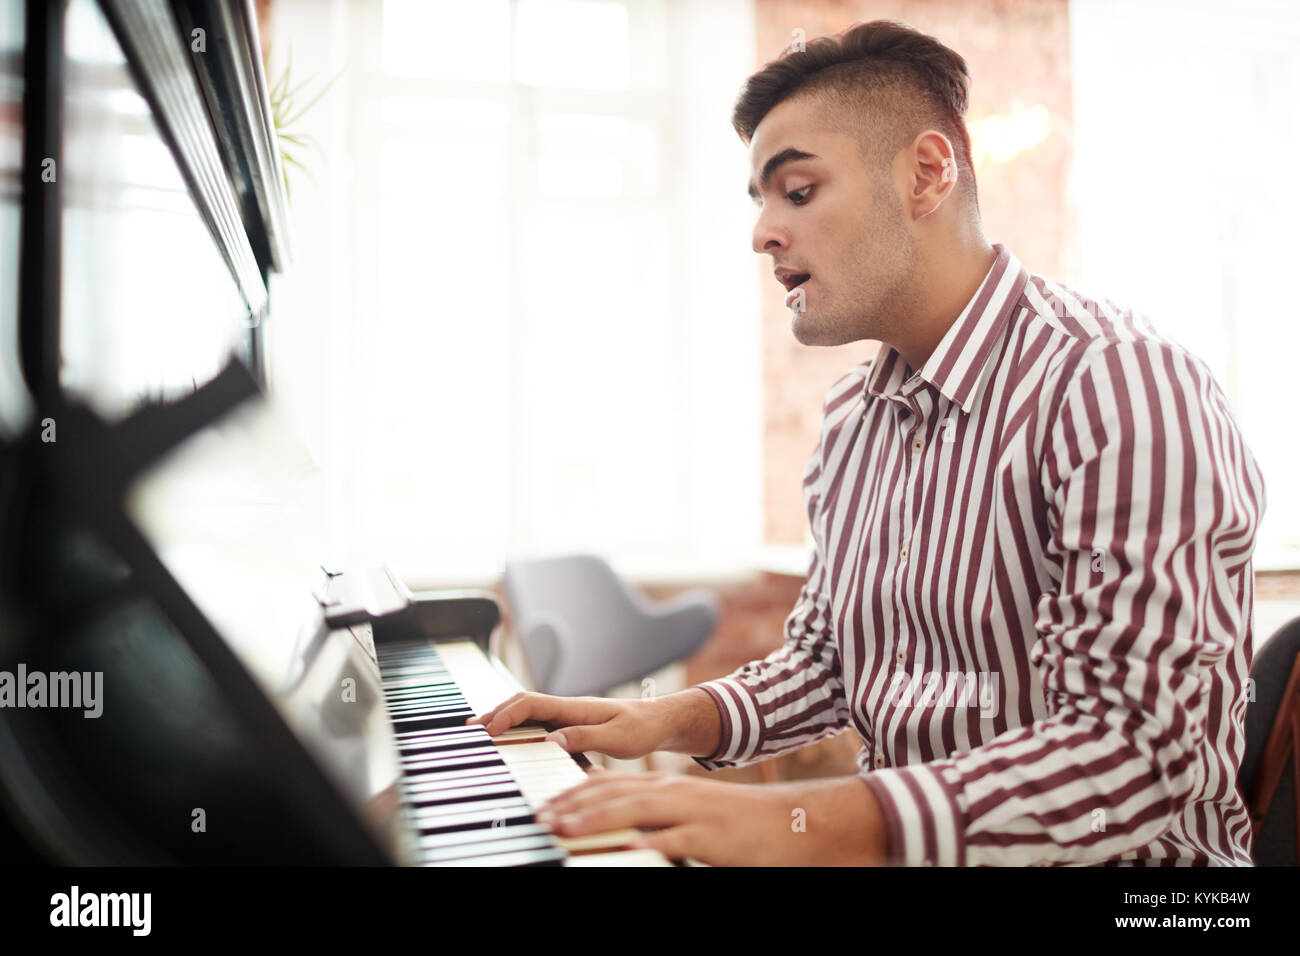 Talented guy Stock Photo